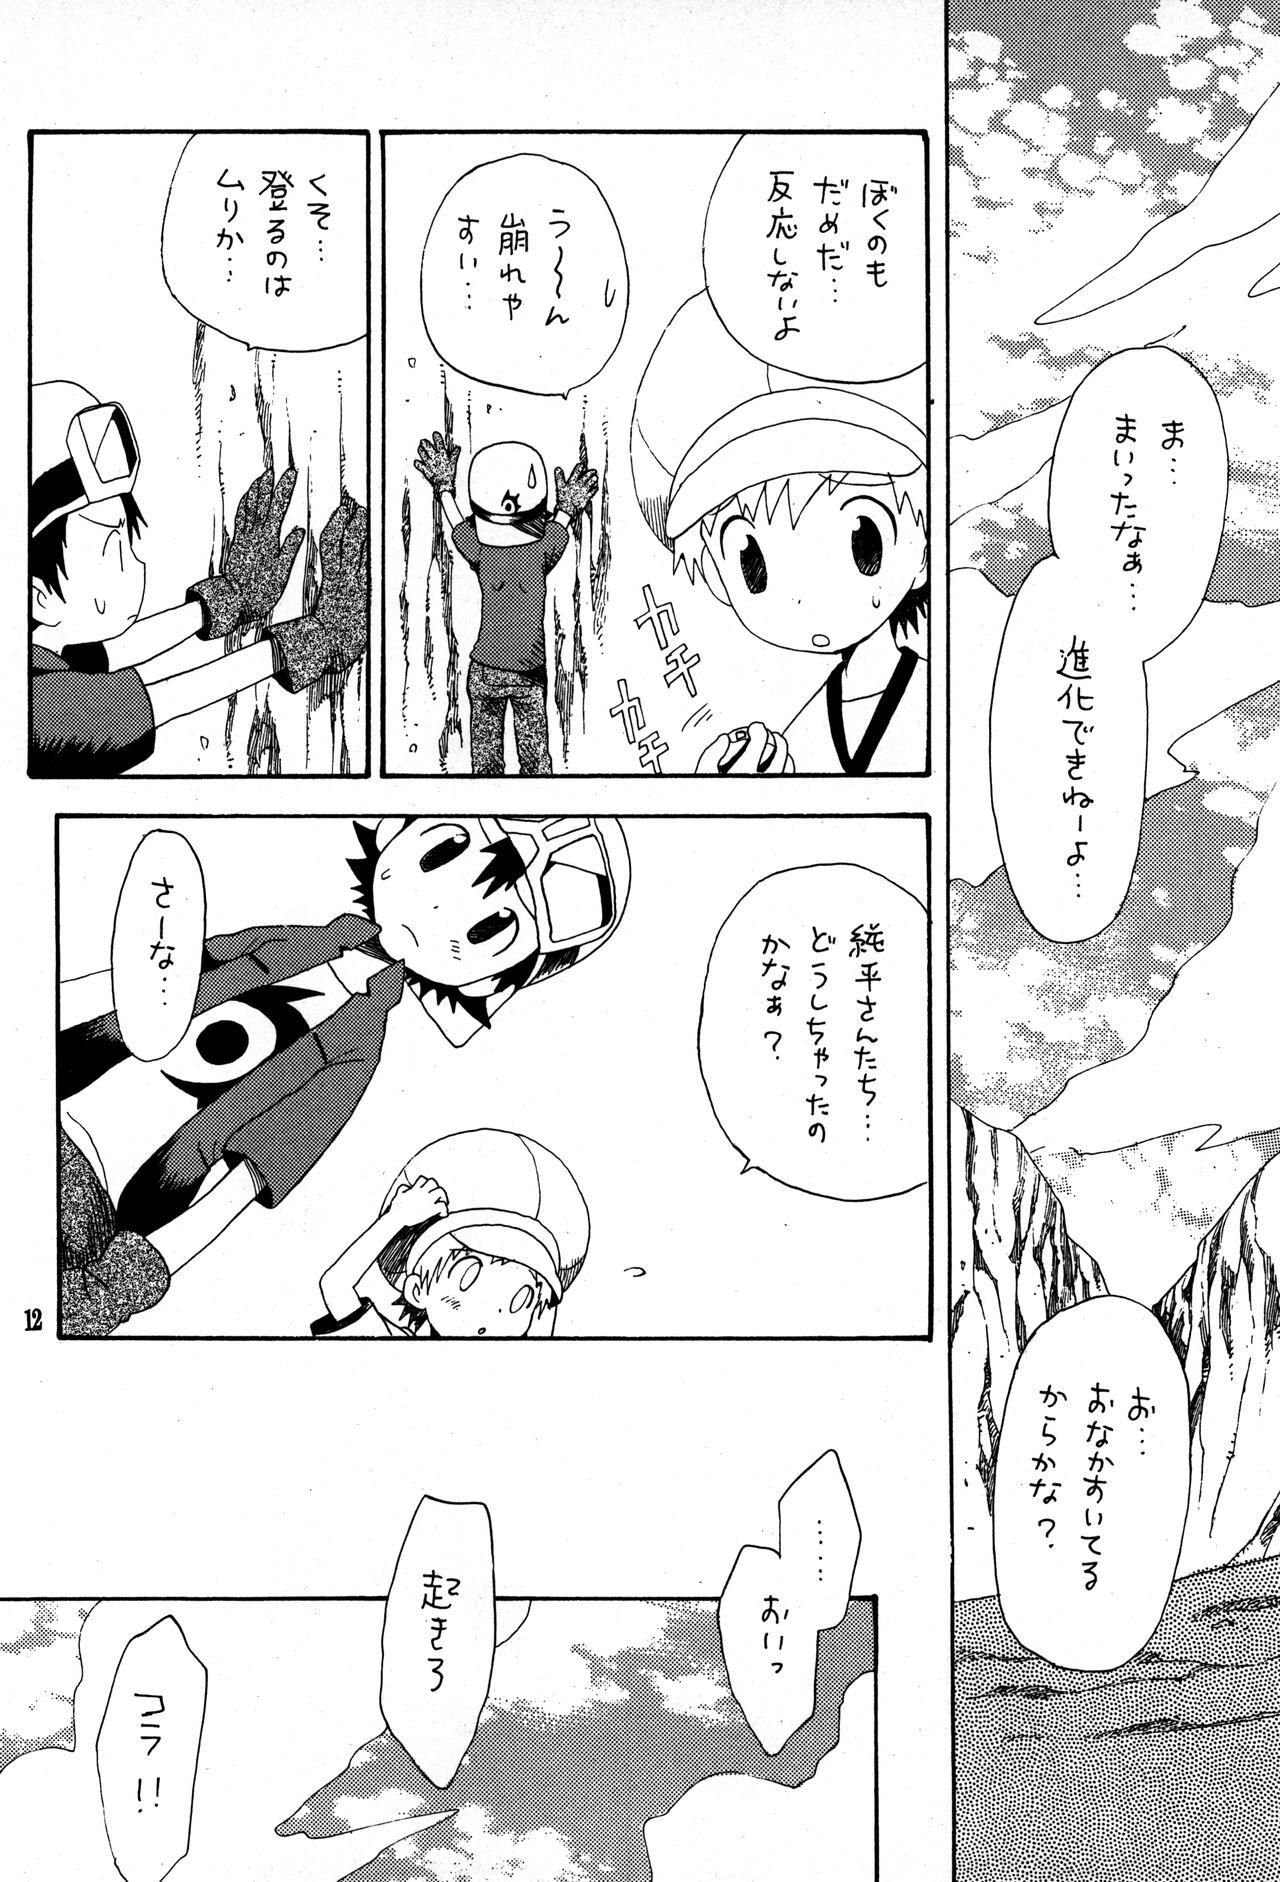 Slapping Brother Blue Berry - Digimon Digimon frontier Hot Teen - Page 11